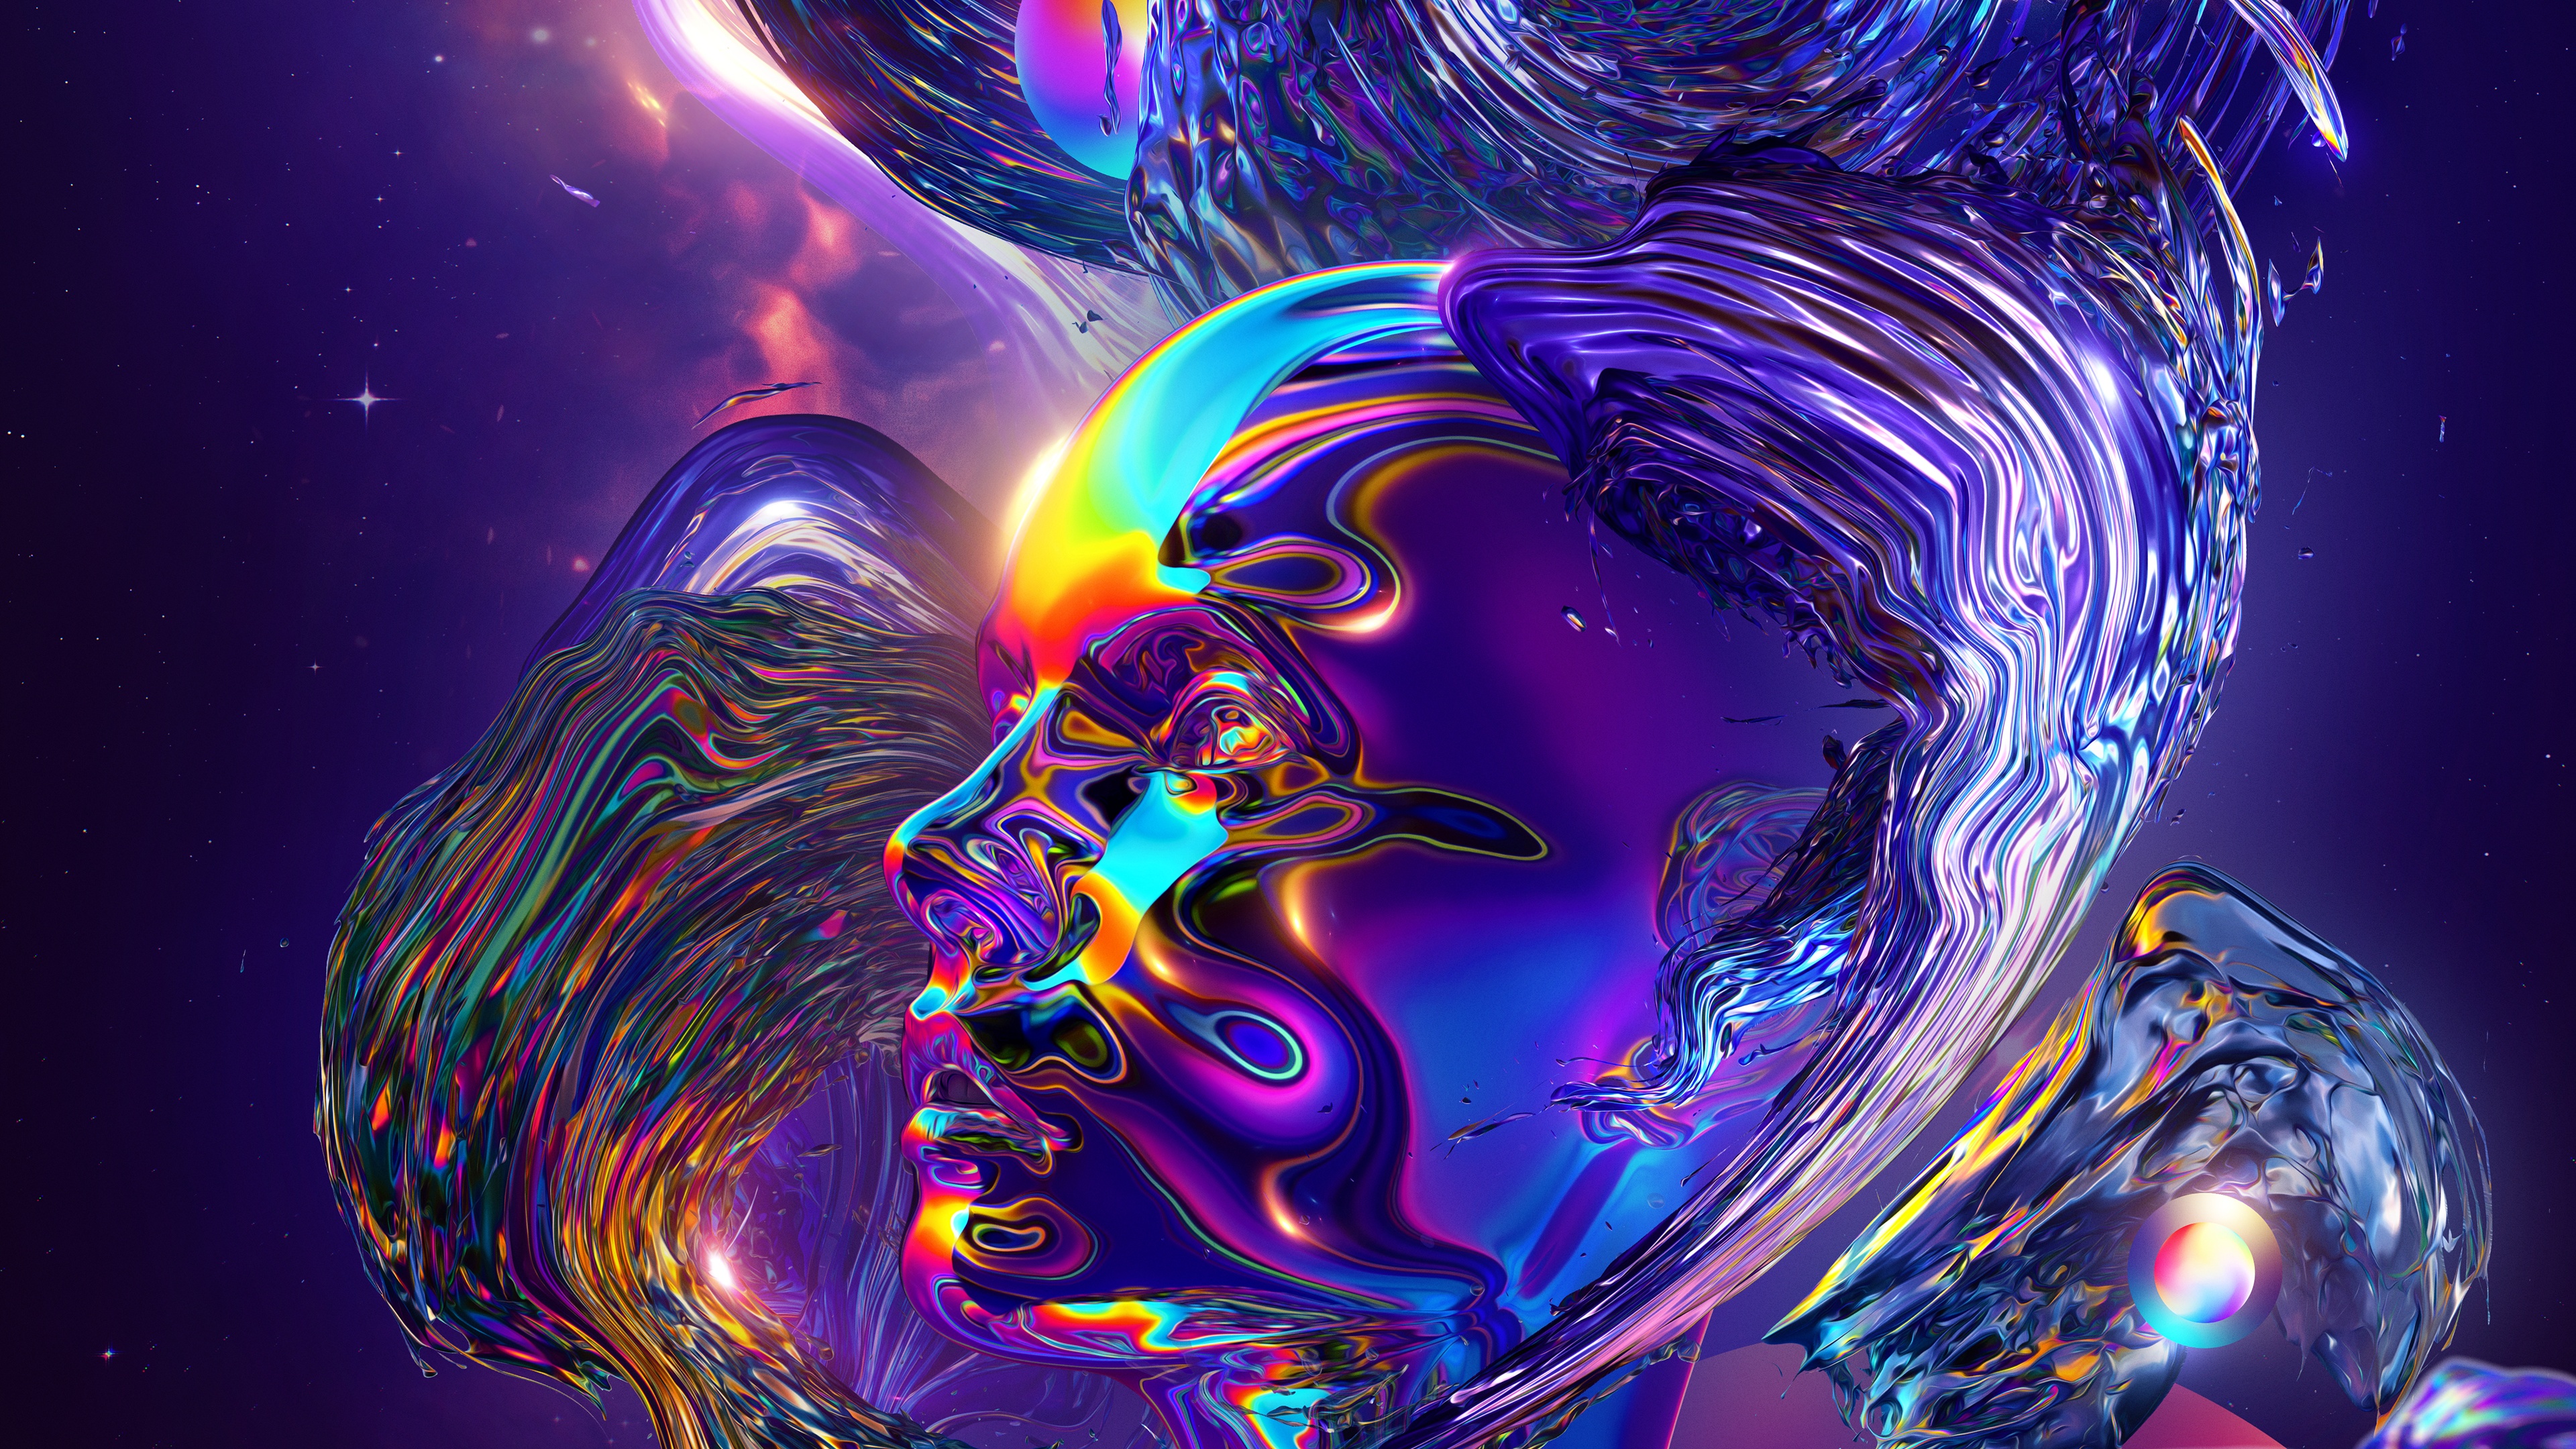 450+ Artistic Psychedelic HD Wallpapers and Backgrounds